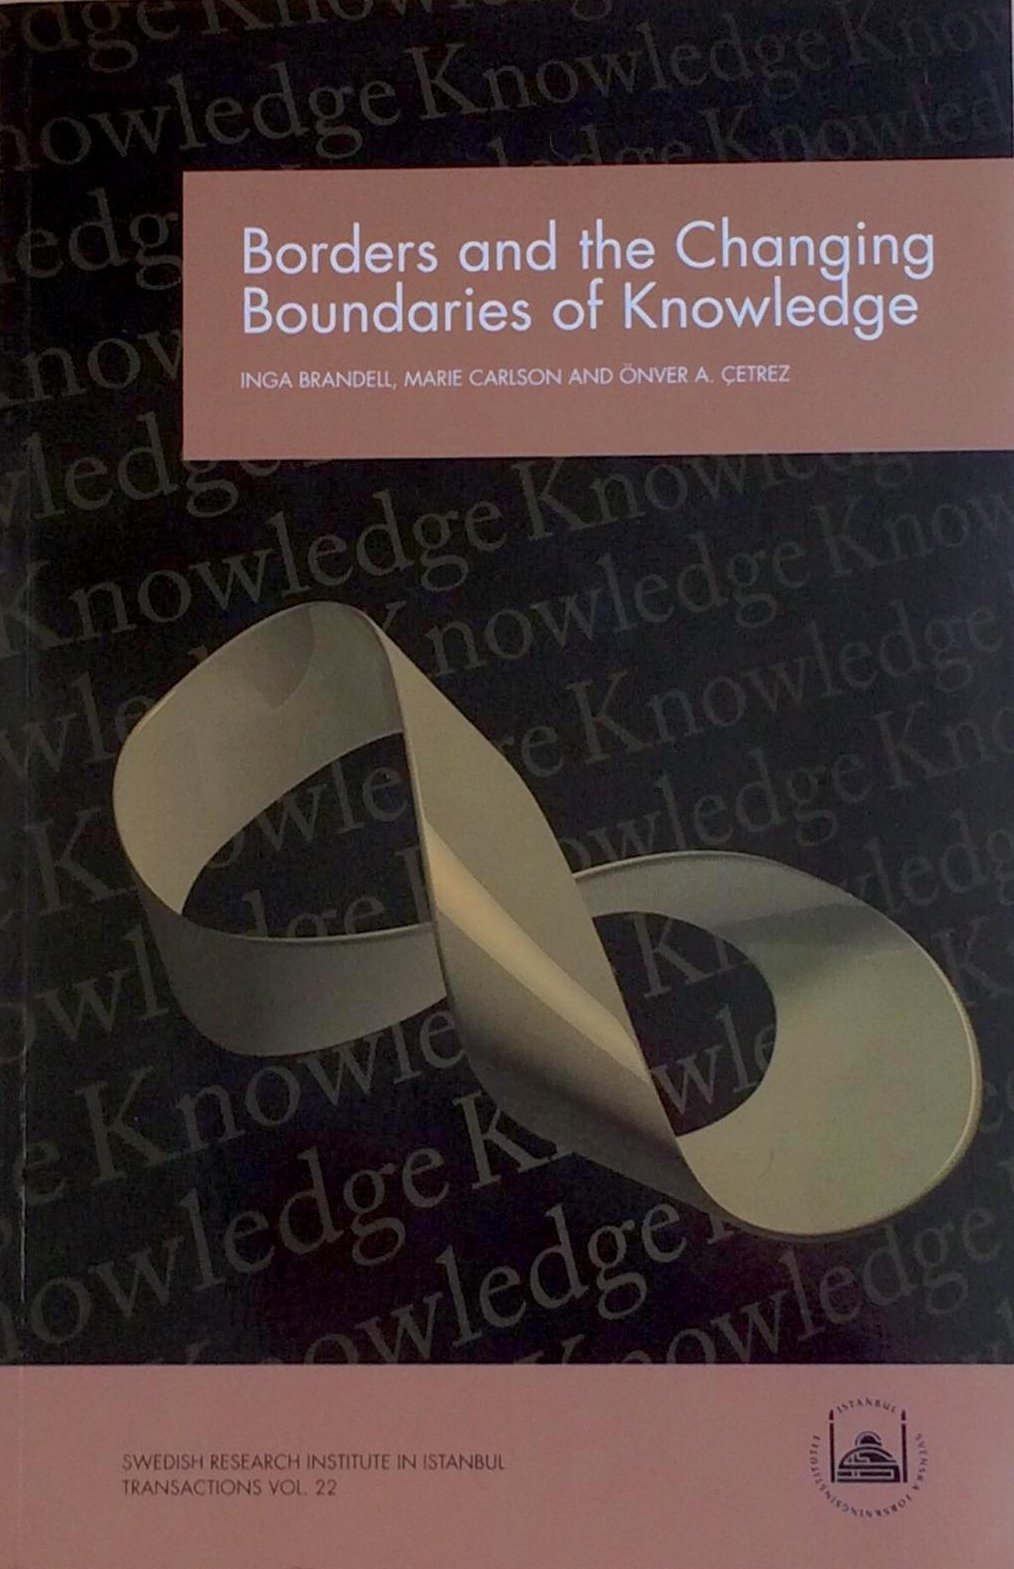 Vol. 22 (2015) Borders and the Changing Boundaries of Knowledge